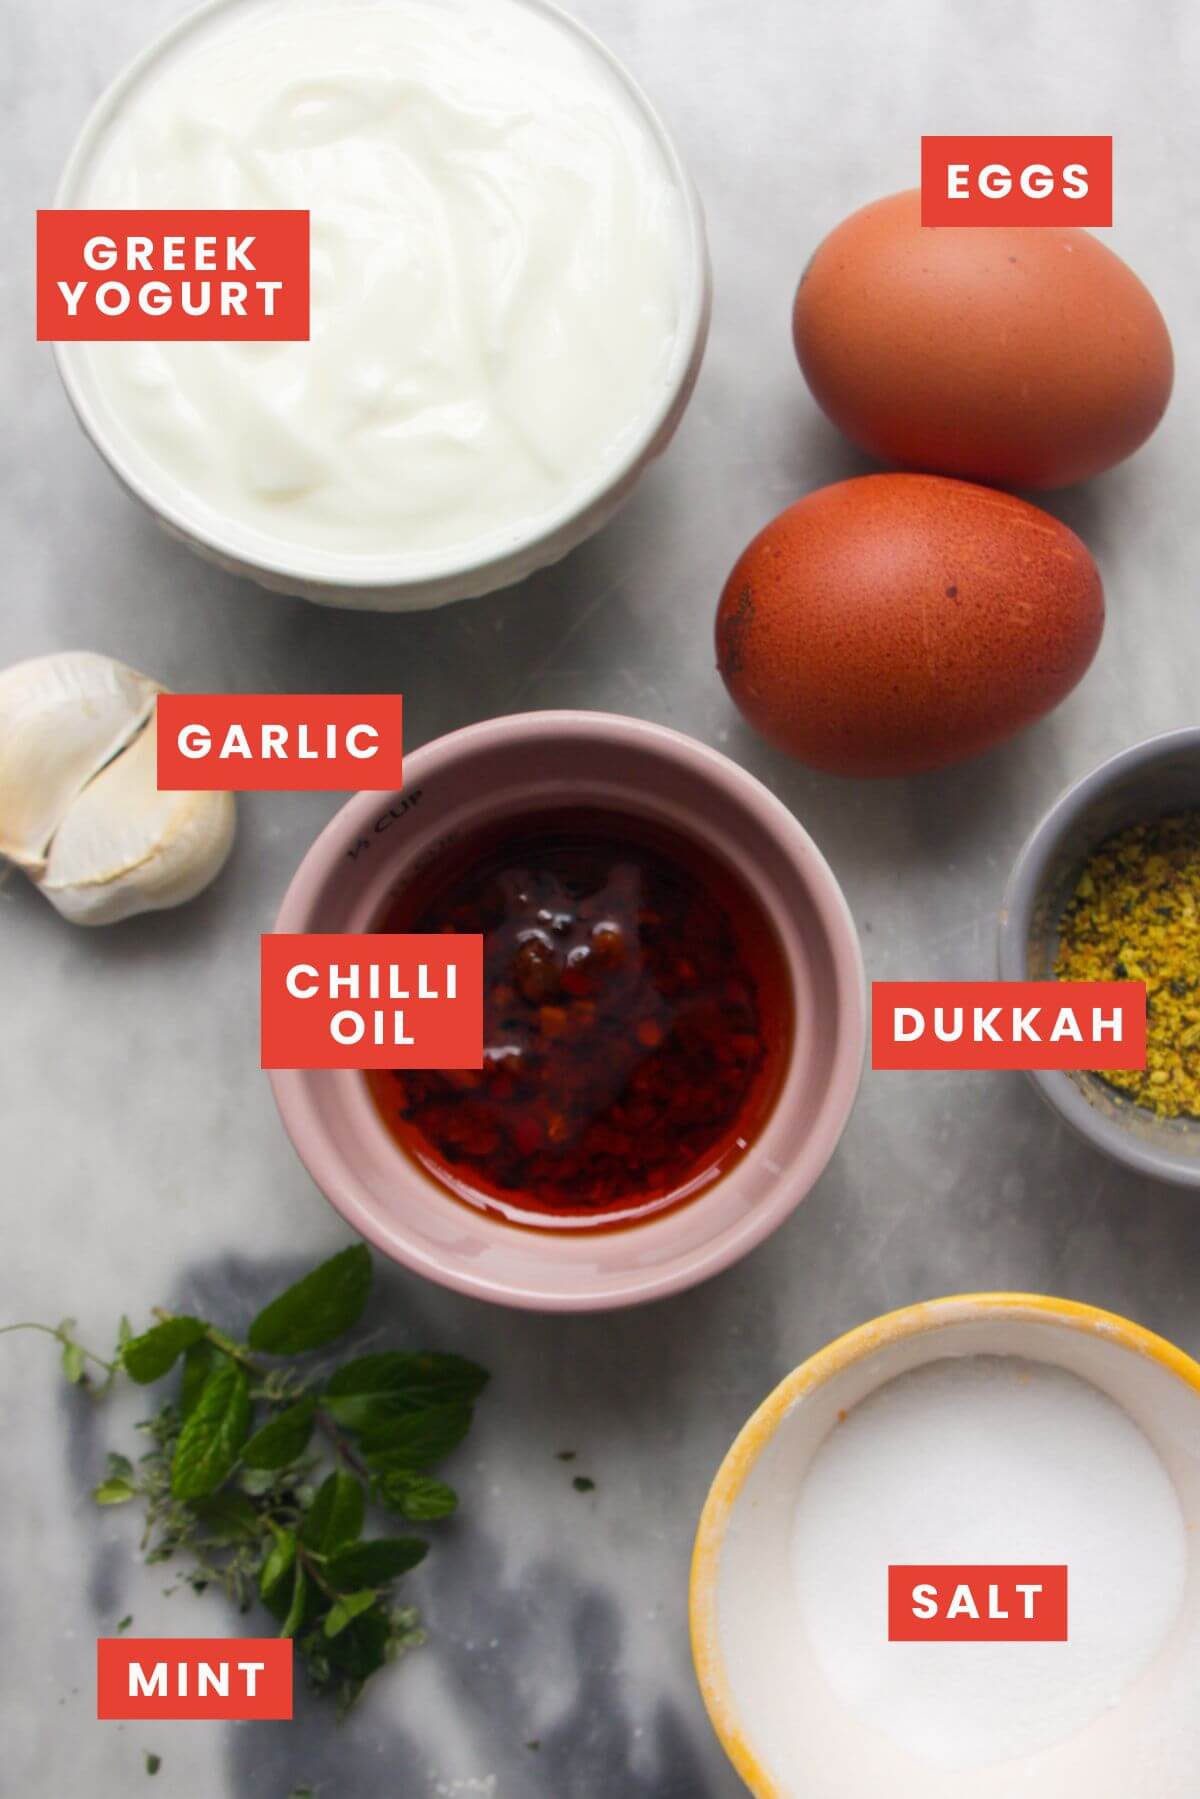 Ingredients for Turkish eggs laid out on a grey marble background and labelled.